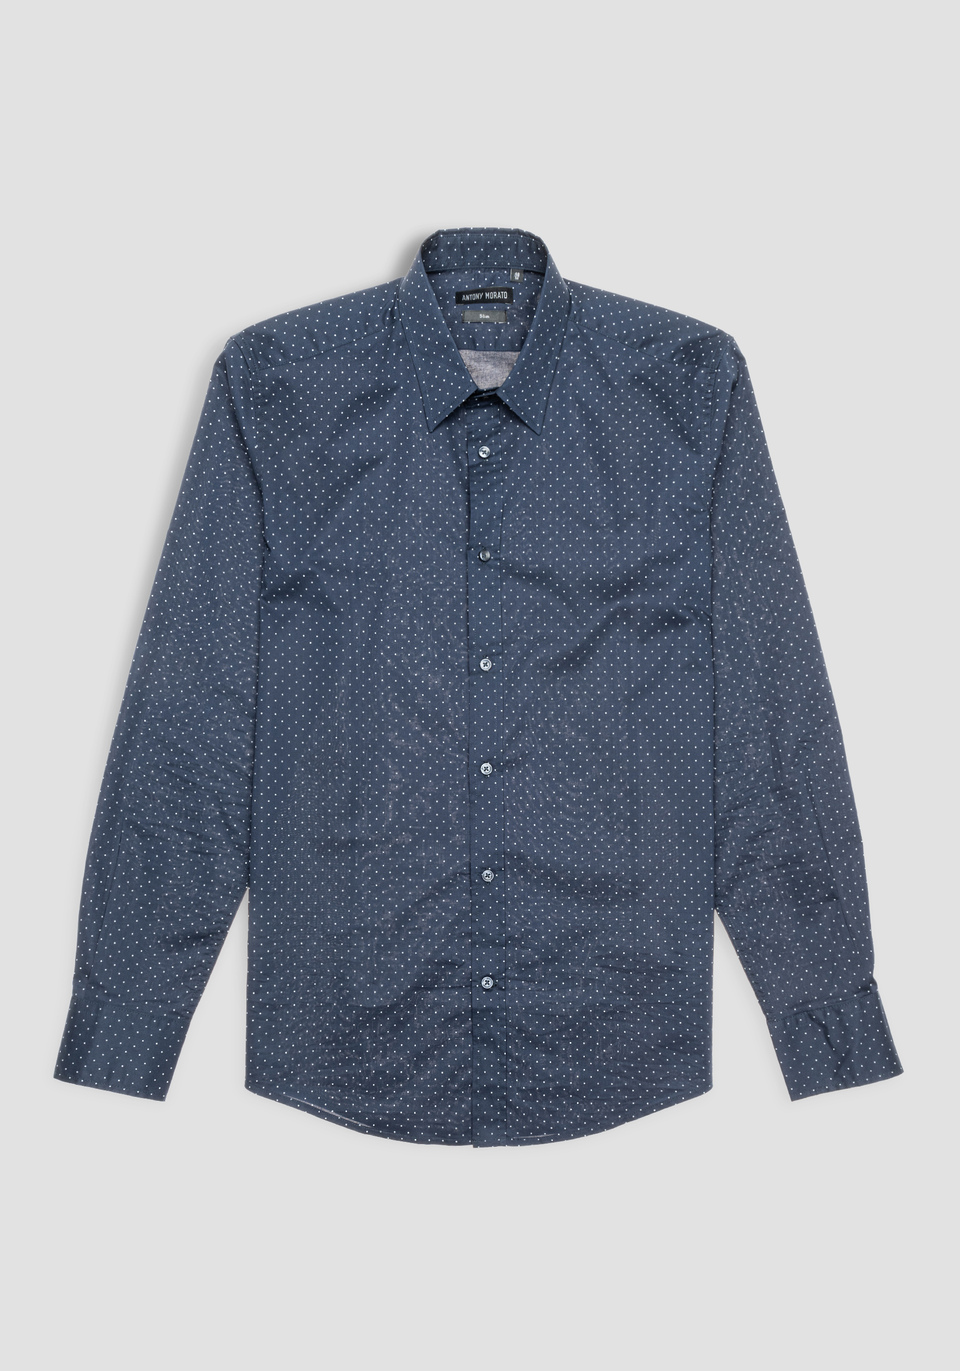 SLIM-FIT SHIRT IN 100% COTTON WITH MICRO-DOT PRINT - Antony Morato Online Shop